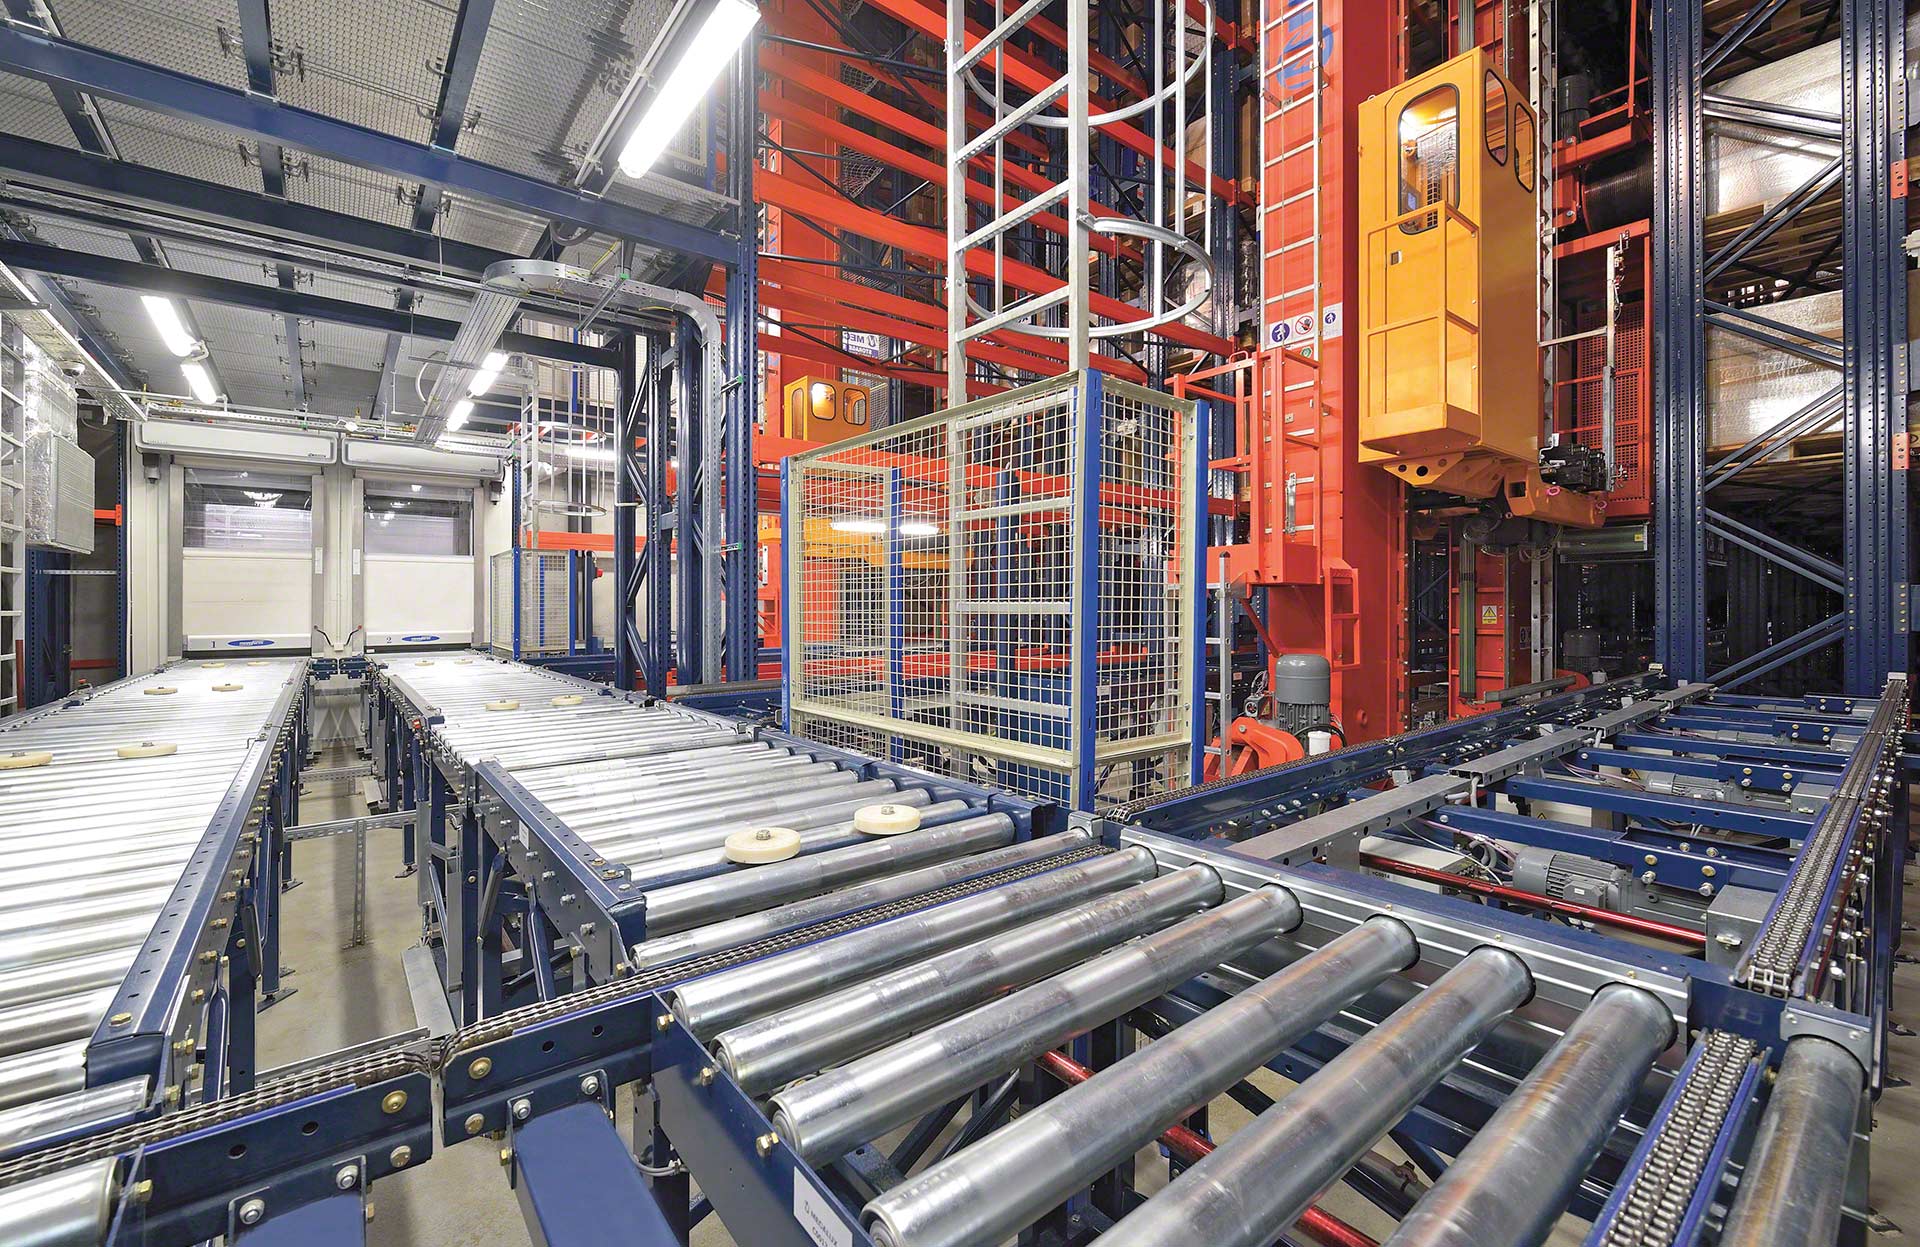 Thanks to their resistance to low temperatures, stacker cranes can be used in cold stores